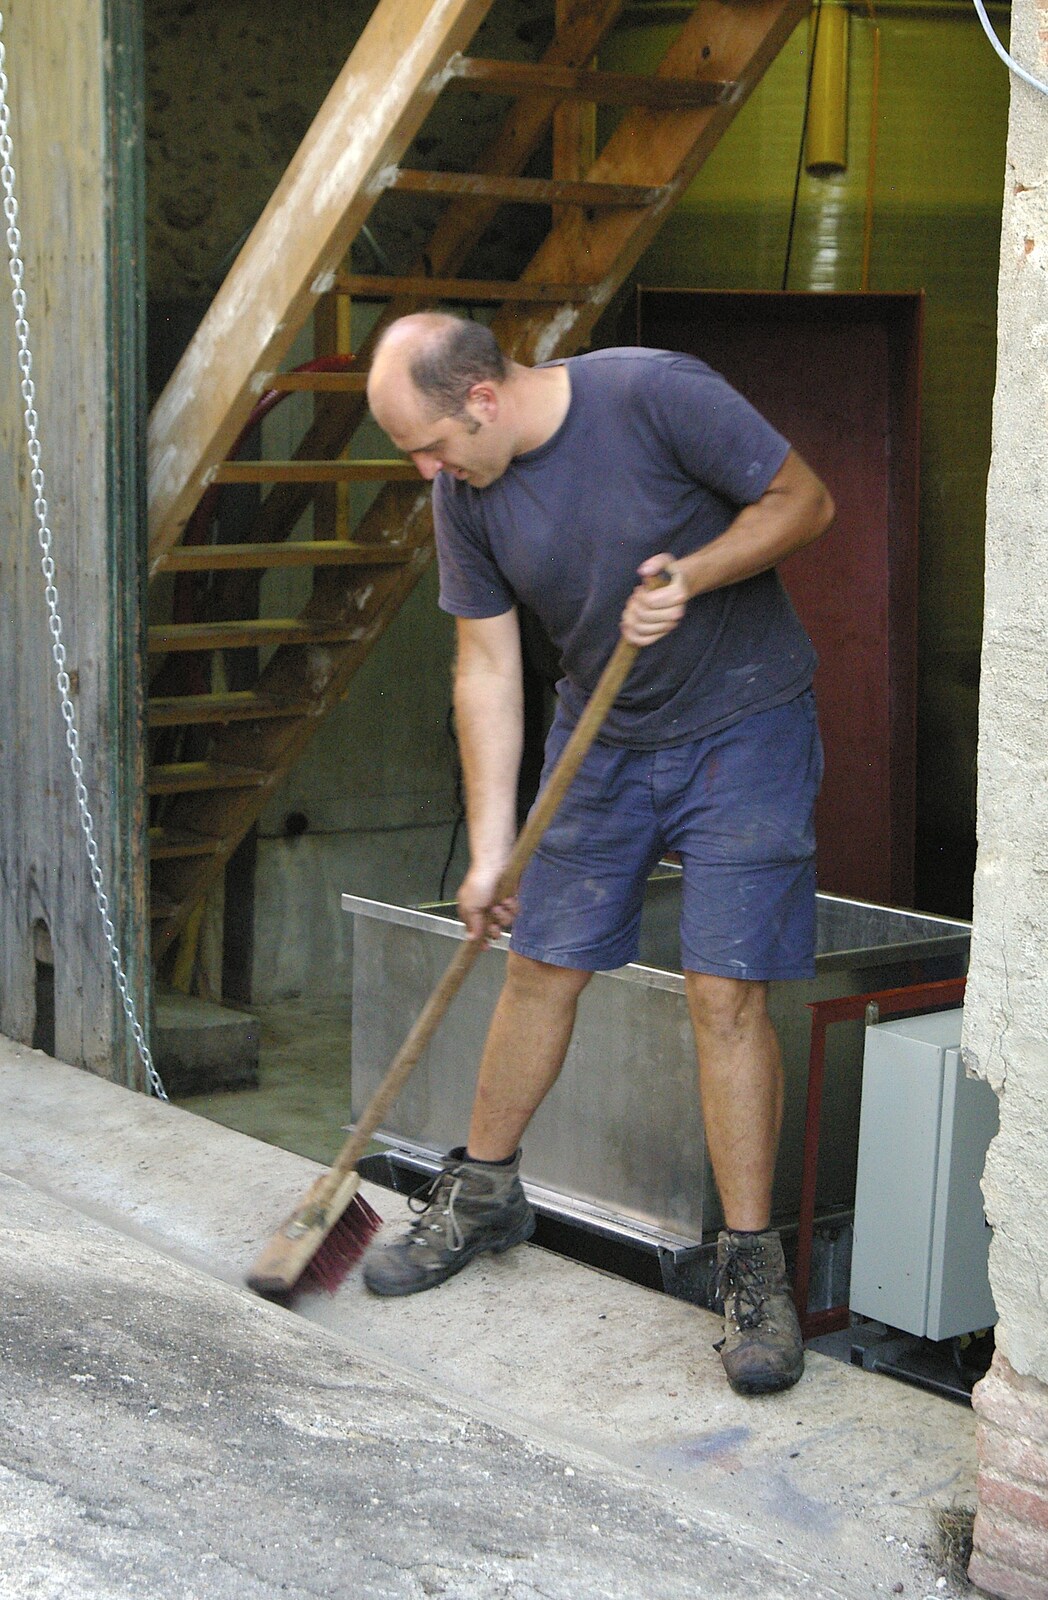 A bit of sweeping occurs from Grape Picking and Pressing, Roussillon, France - 19th September 2006